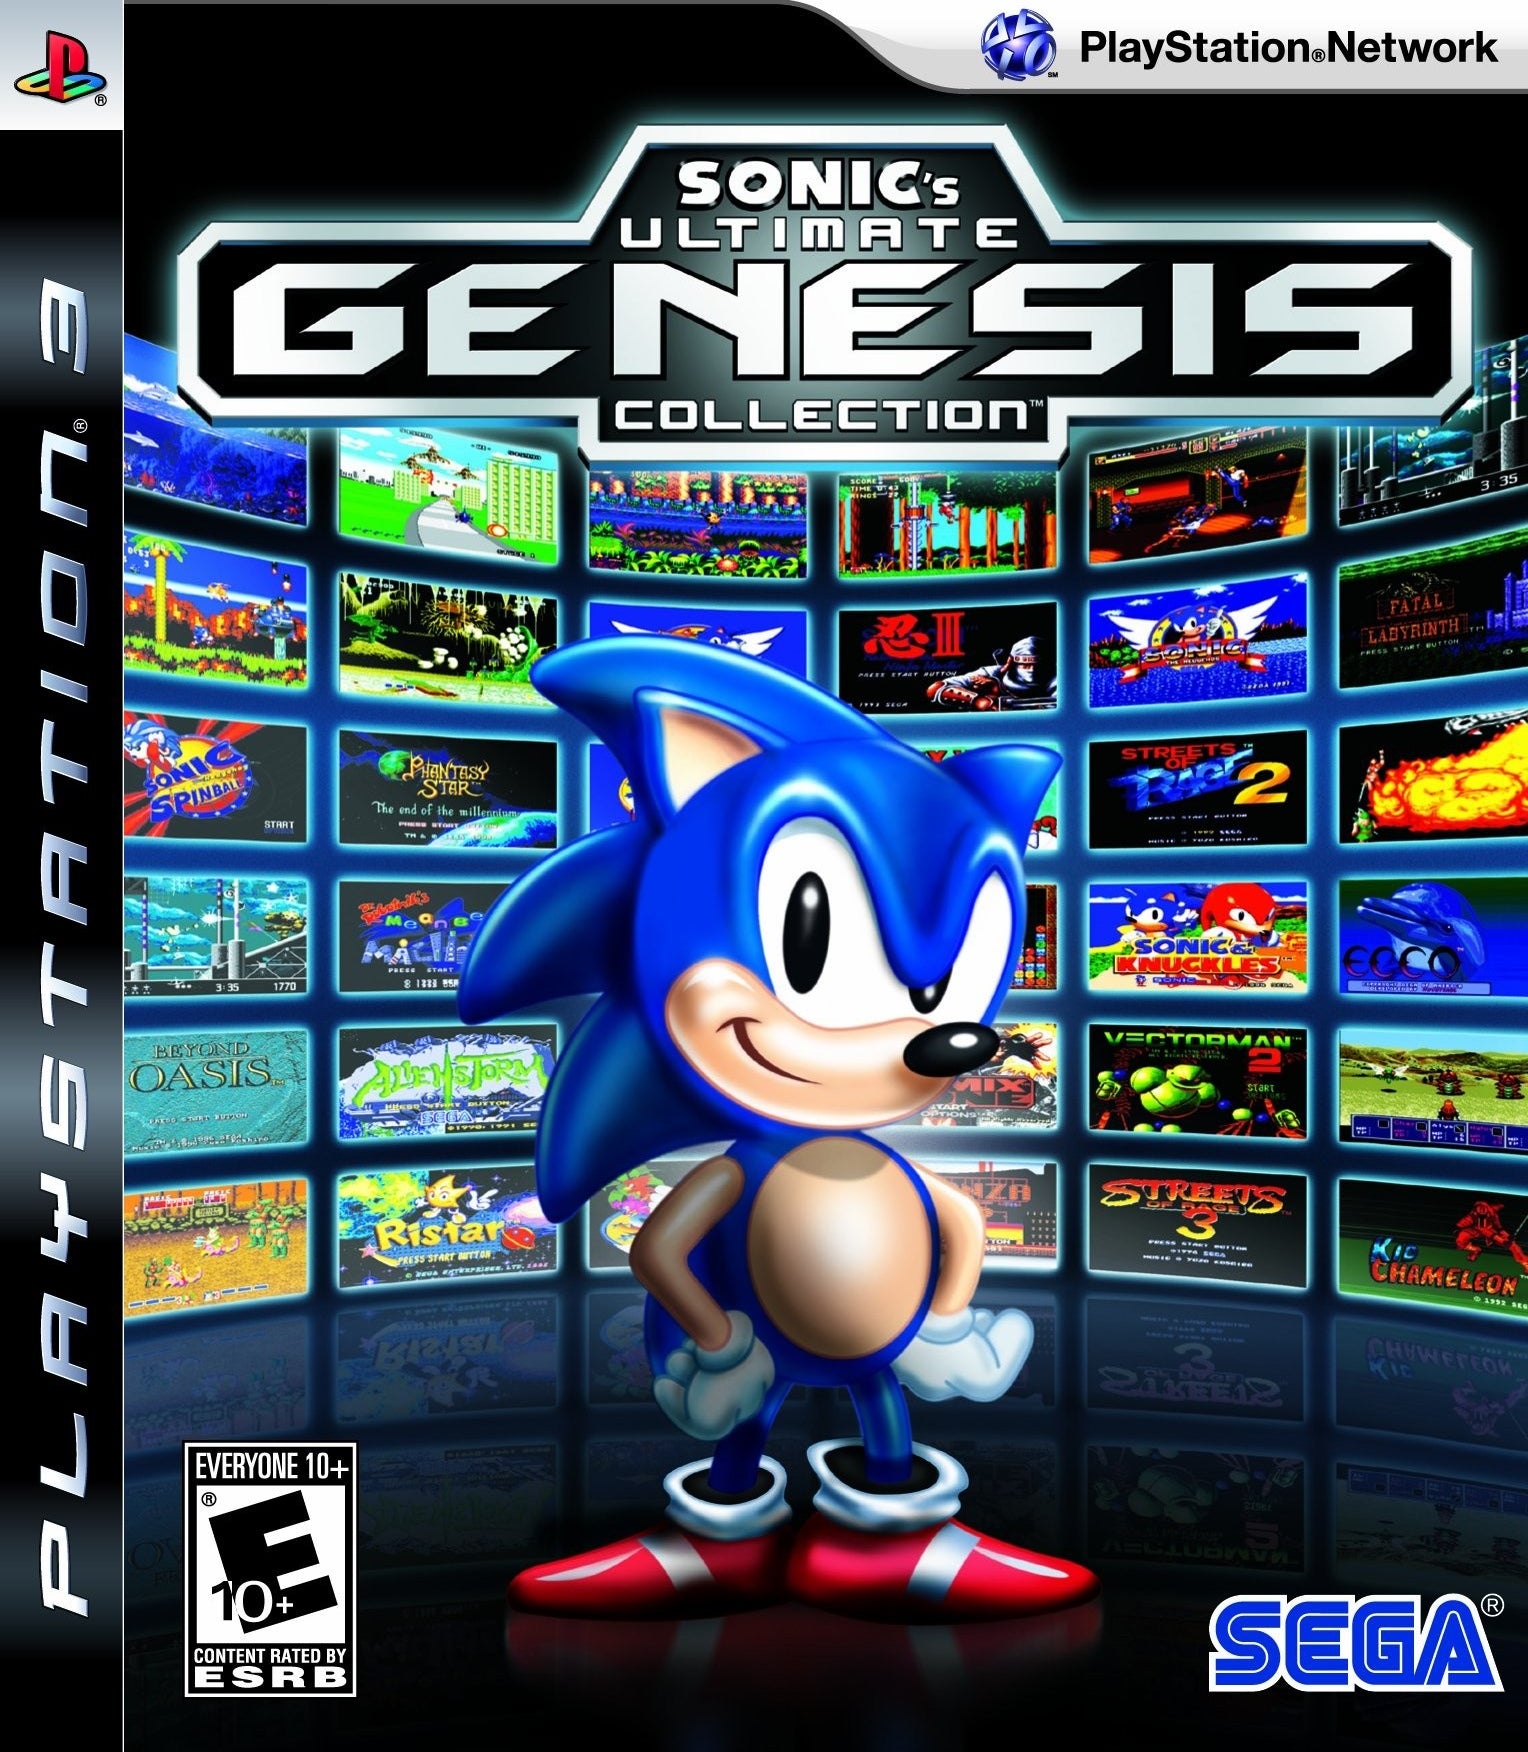 Sonic's Ultimate Genesis Collection - PlayStation 3 (PS3) Game